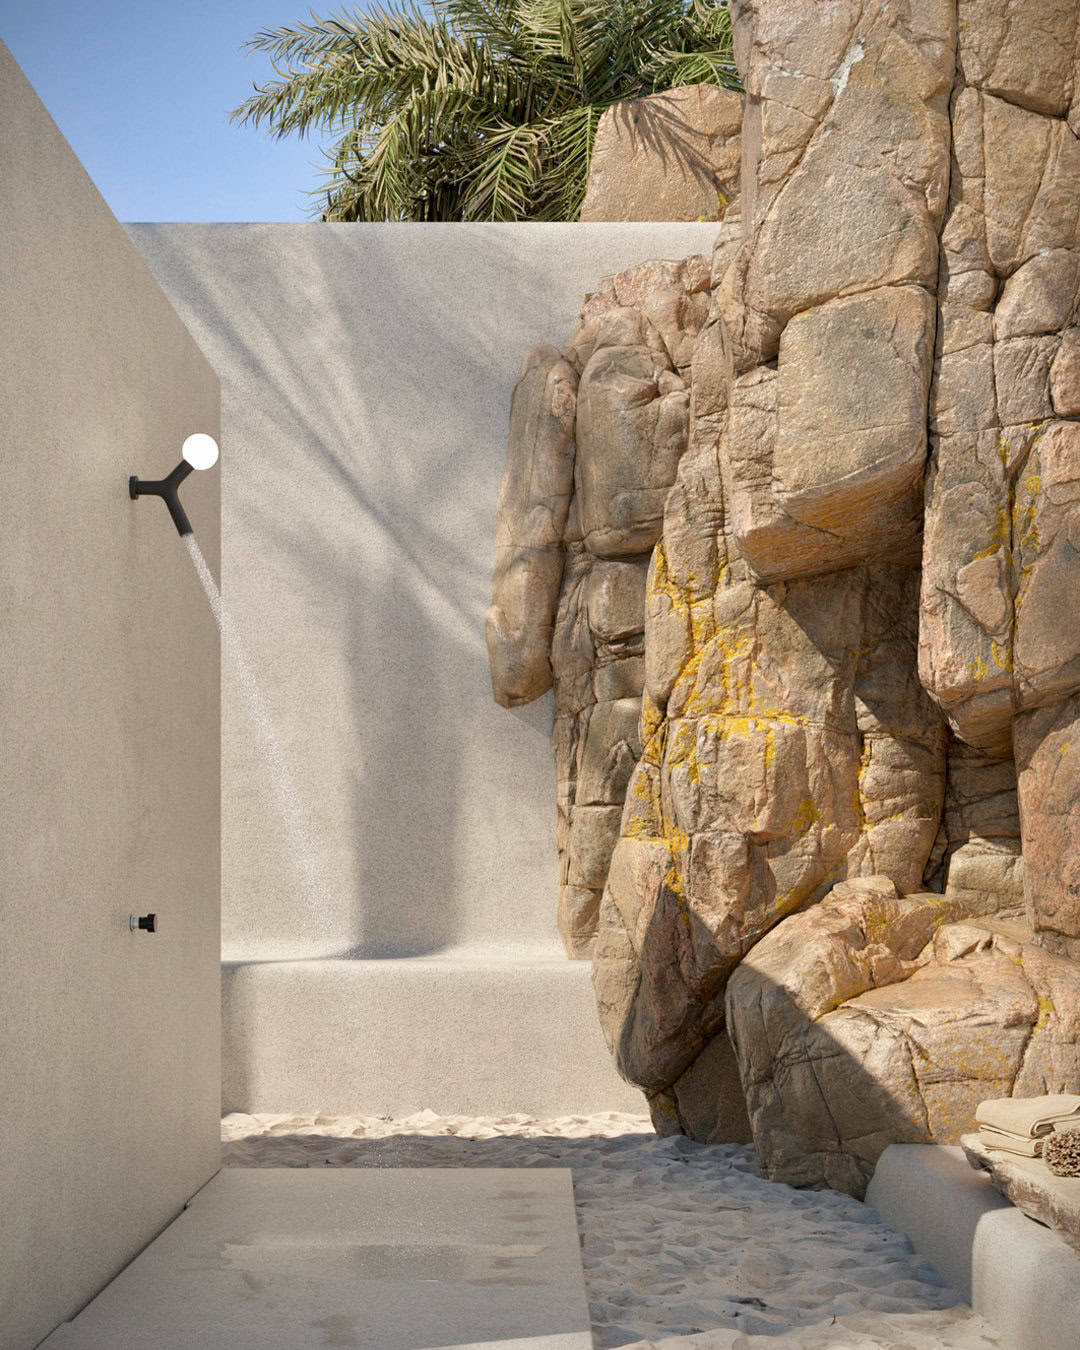 Exterior walkway next to a textured rock formation, perfect for outdoor shower ideas, with a stark white wall on the left equipped with a modern light fixture. The ground has sandy paving stones leading into